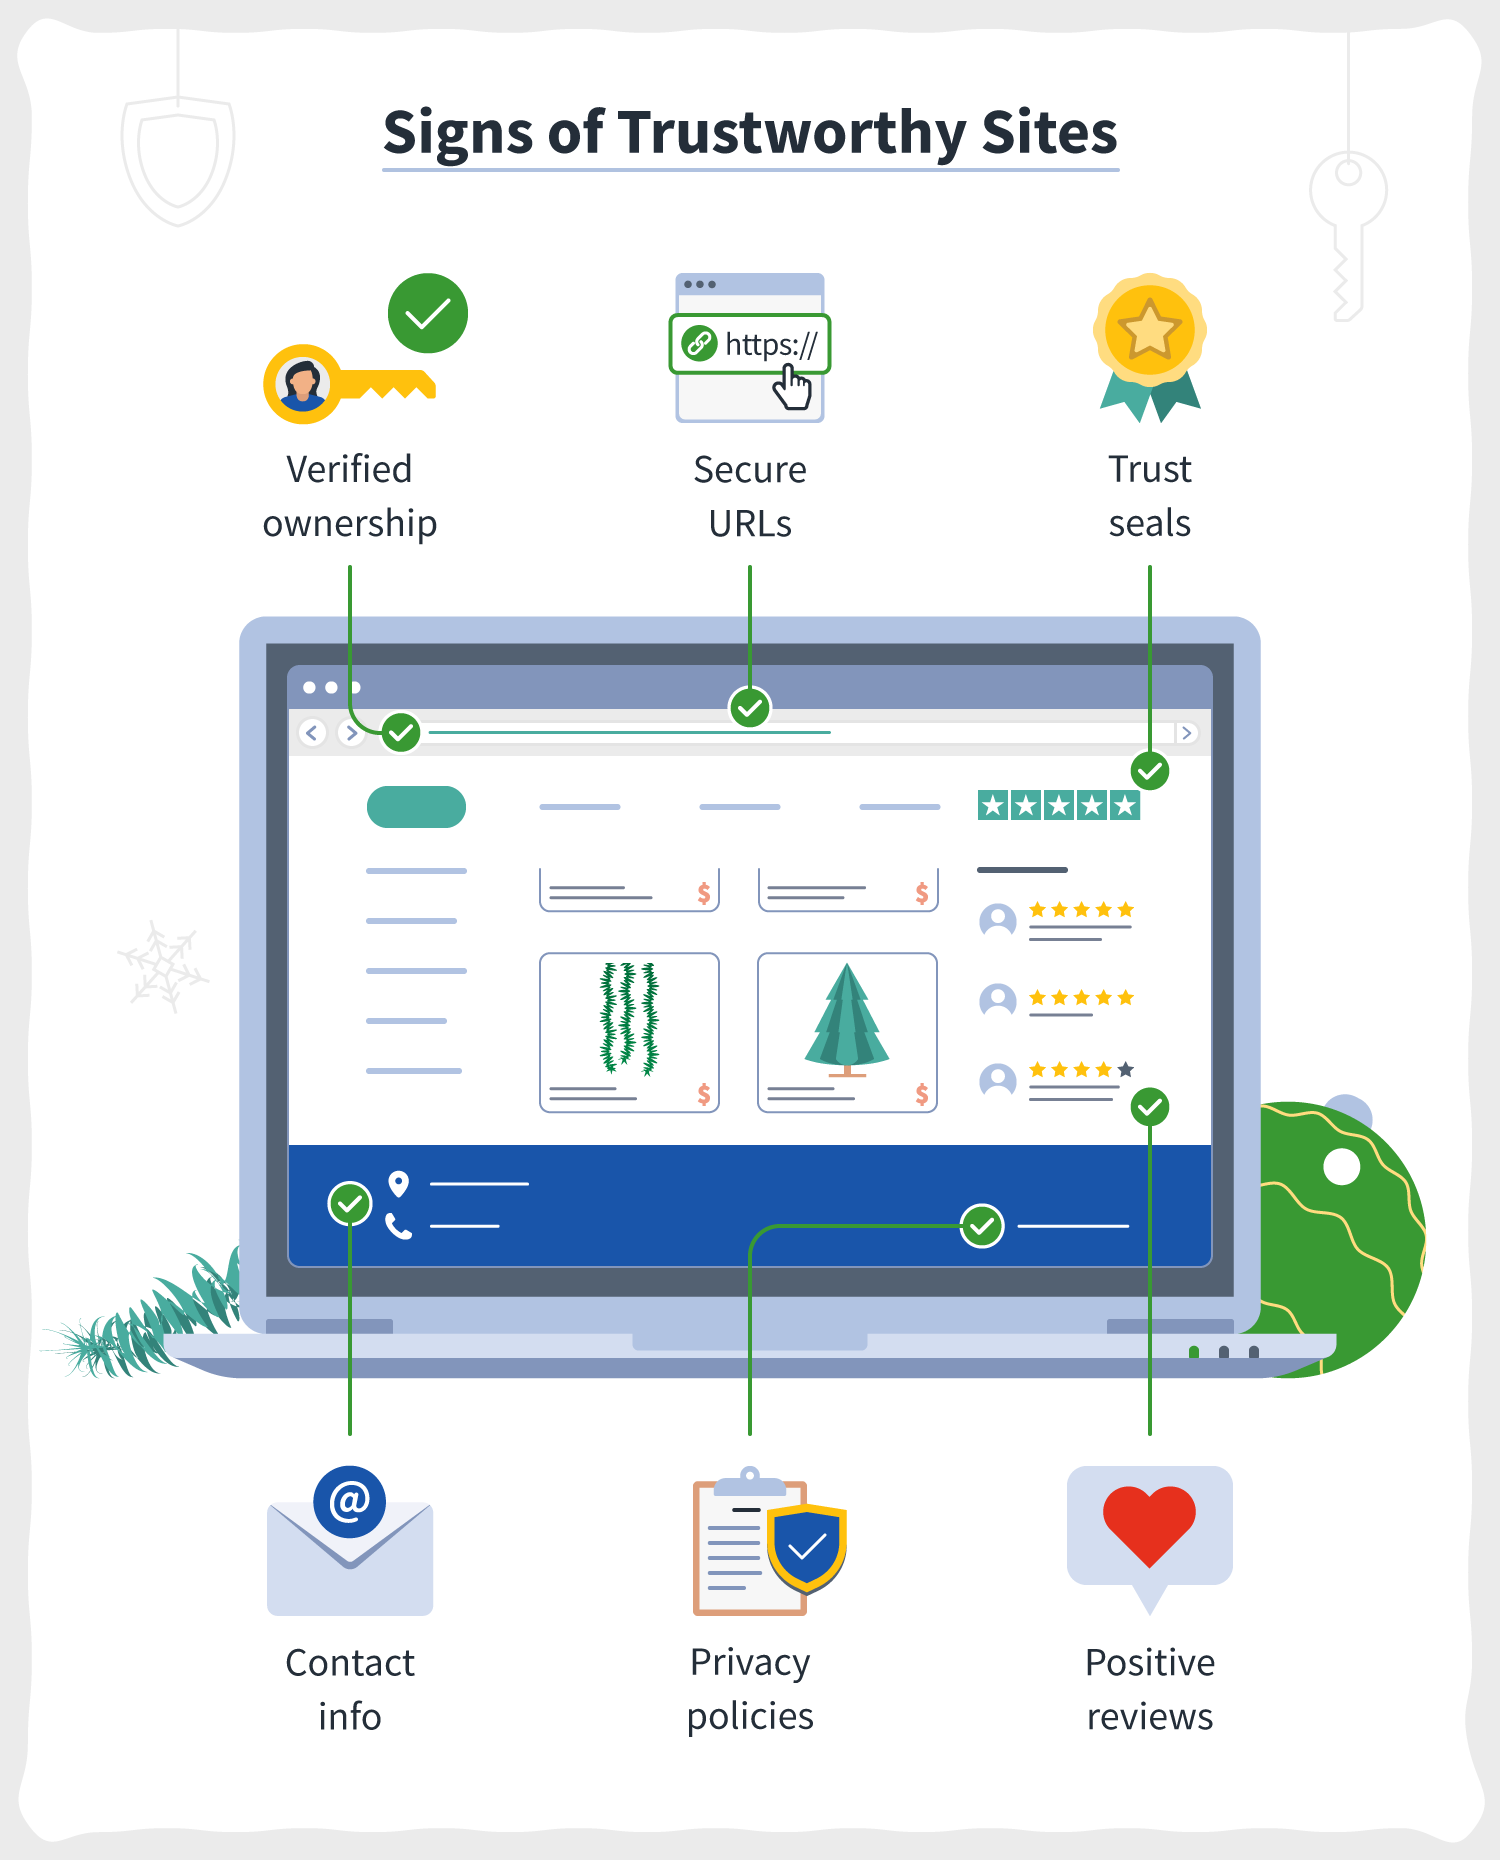 A verified ownership, secure URL, trust seal, contact info, privacy policy, and positive review icon demonstrate the elements of a trustworthy website, all of which can help determine how to know if a website is safe.